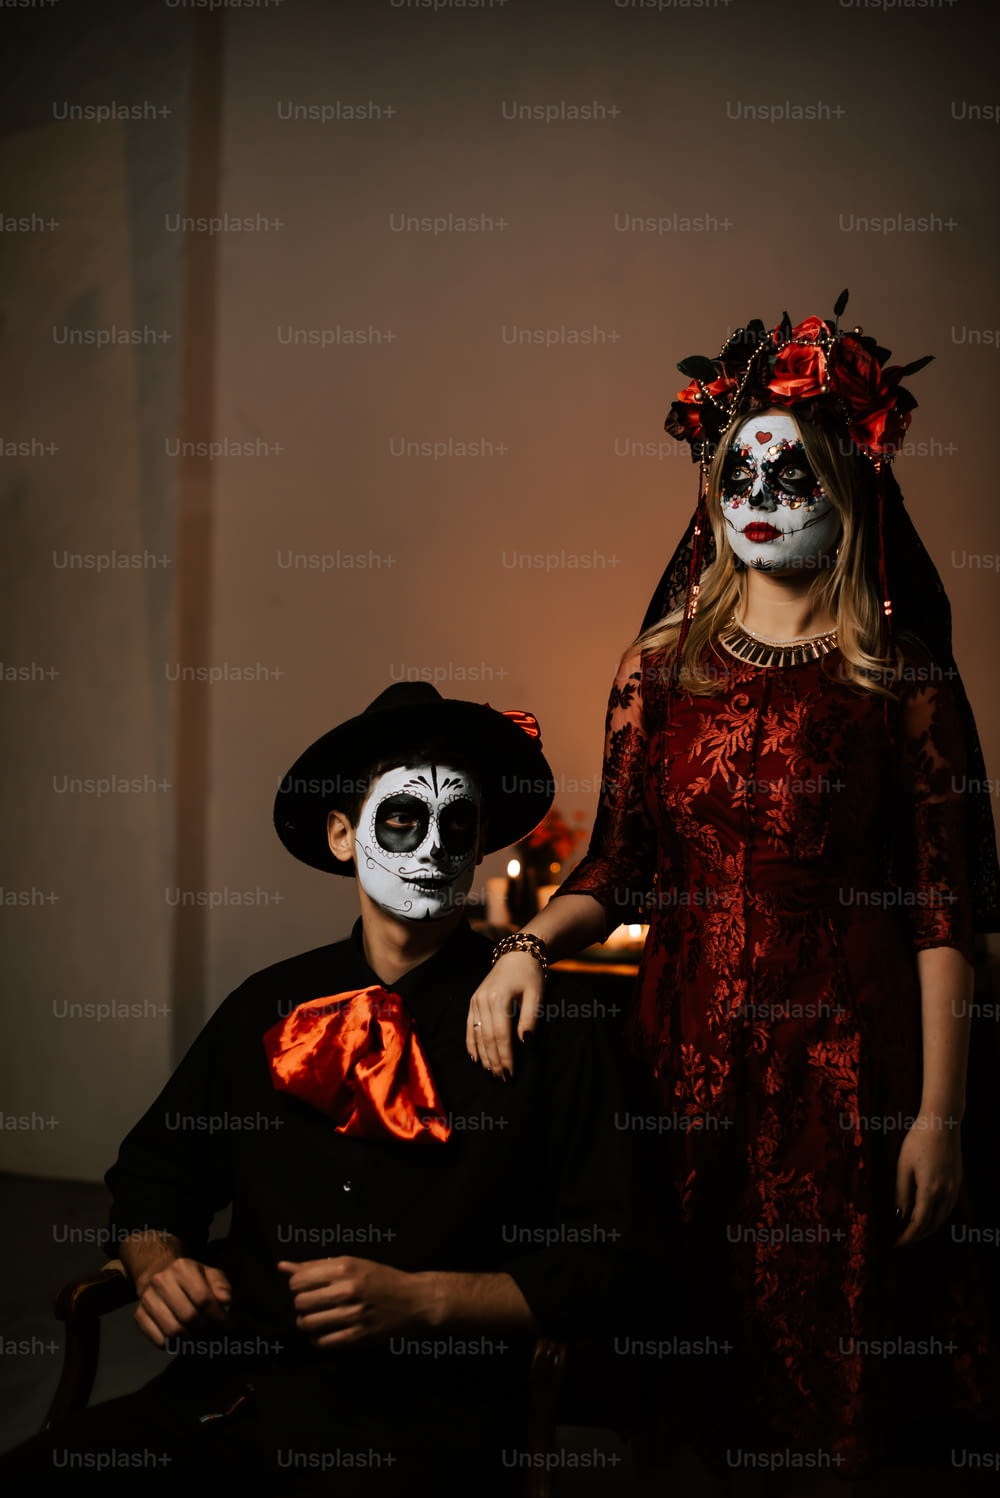 a man and a woman in skeleton makeup